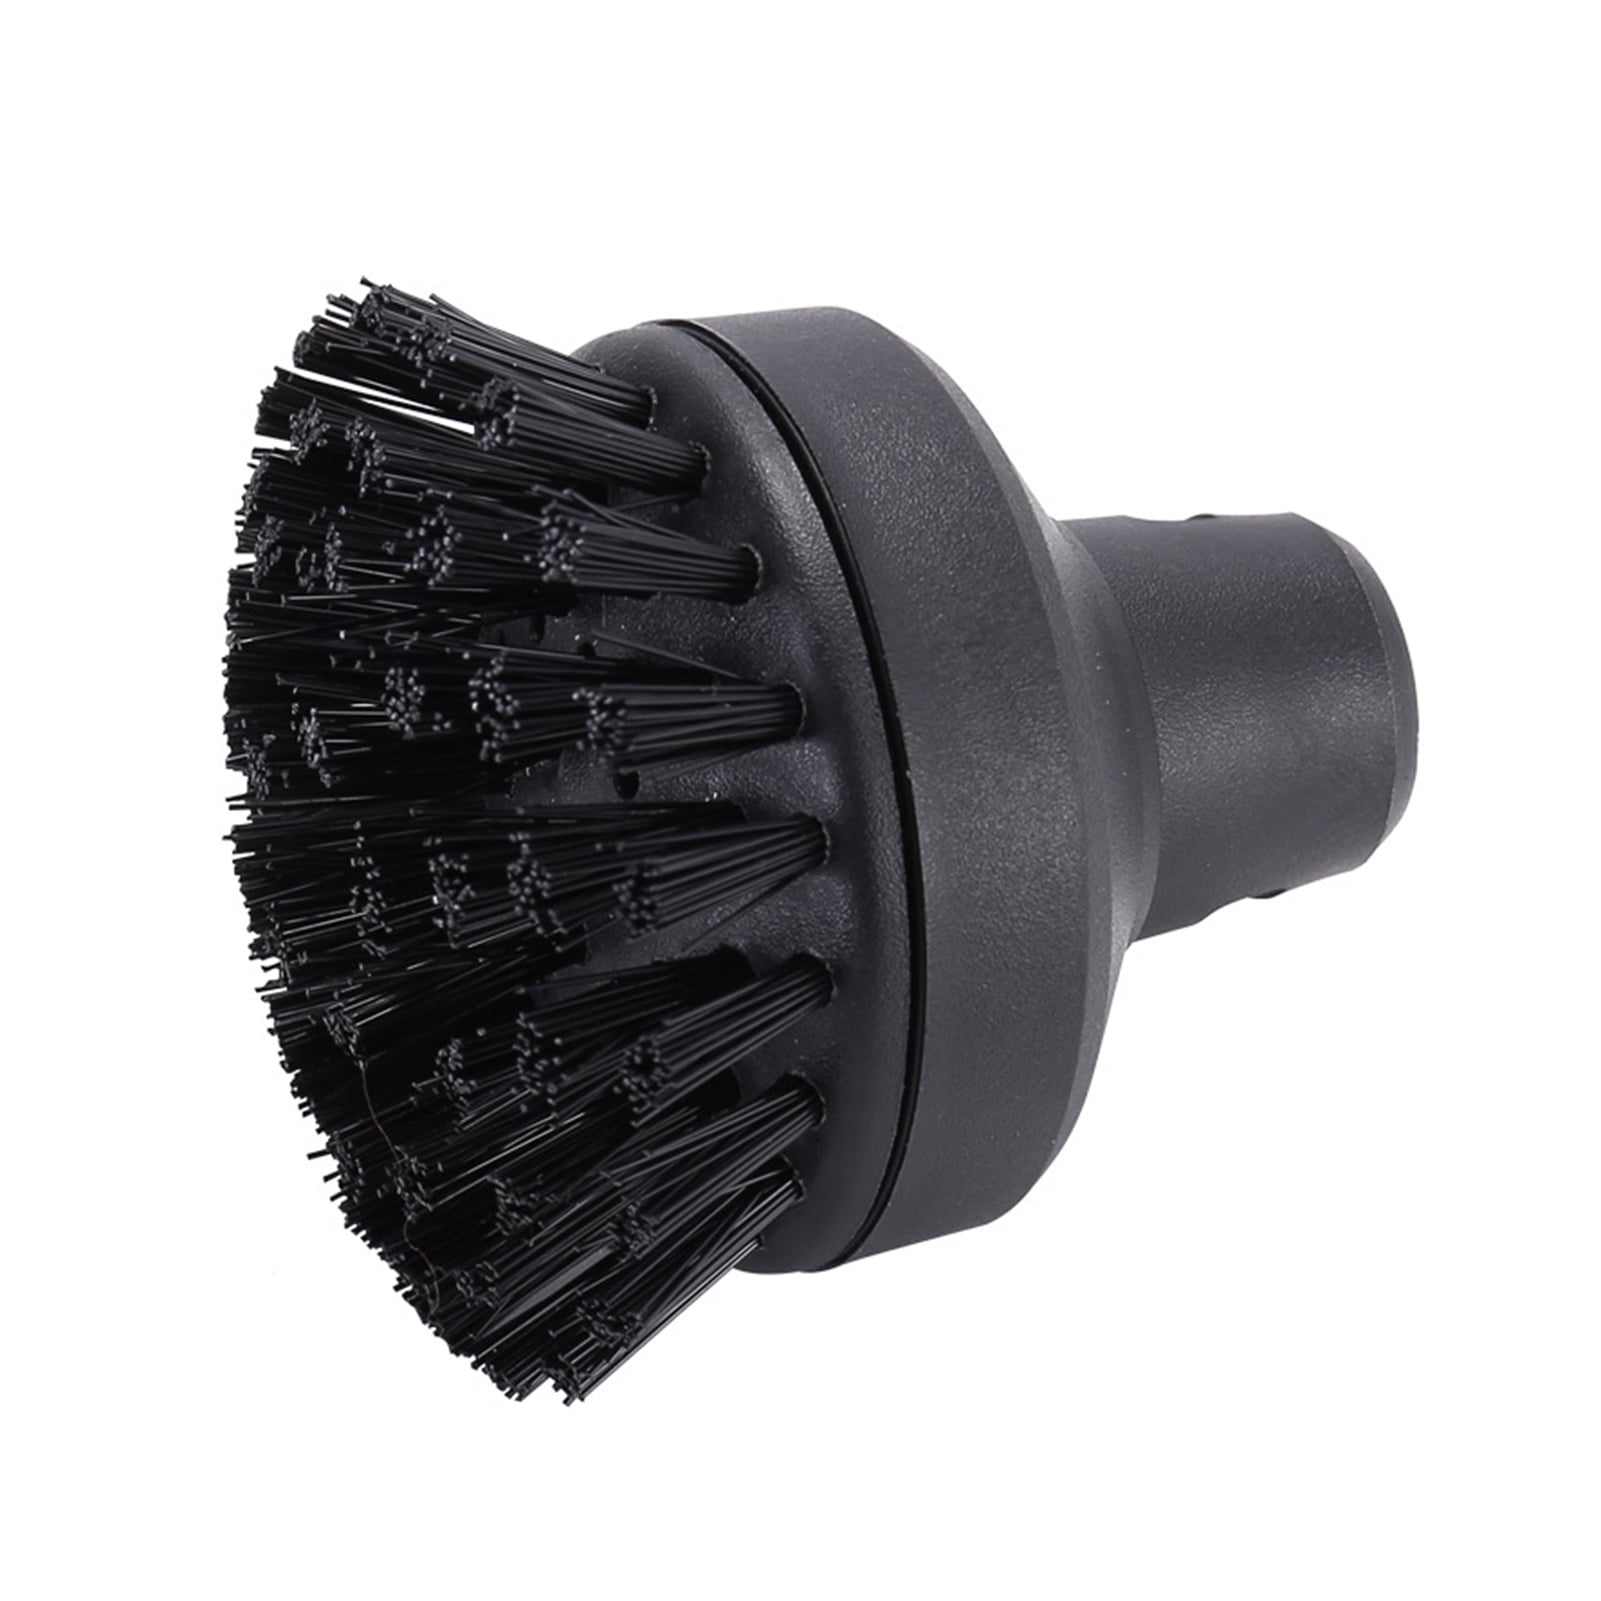 1 Pack Steam Cleaners Large Round Cleaning Brush For Karcher SC1 SC2 SC3 SC4 SC5 